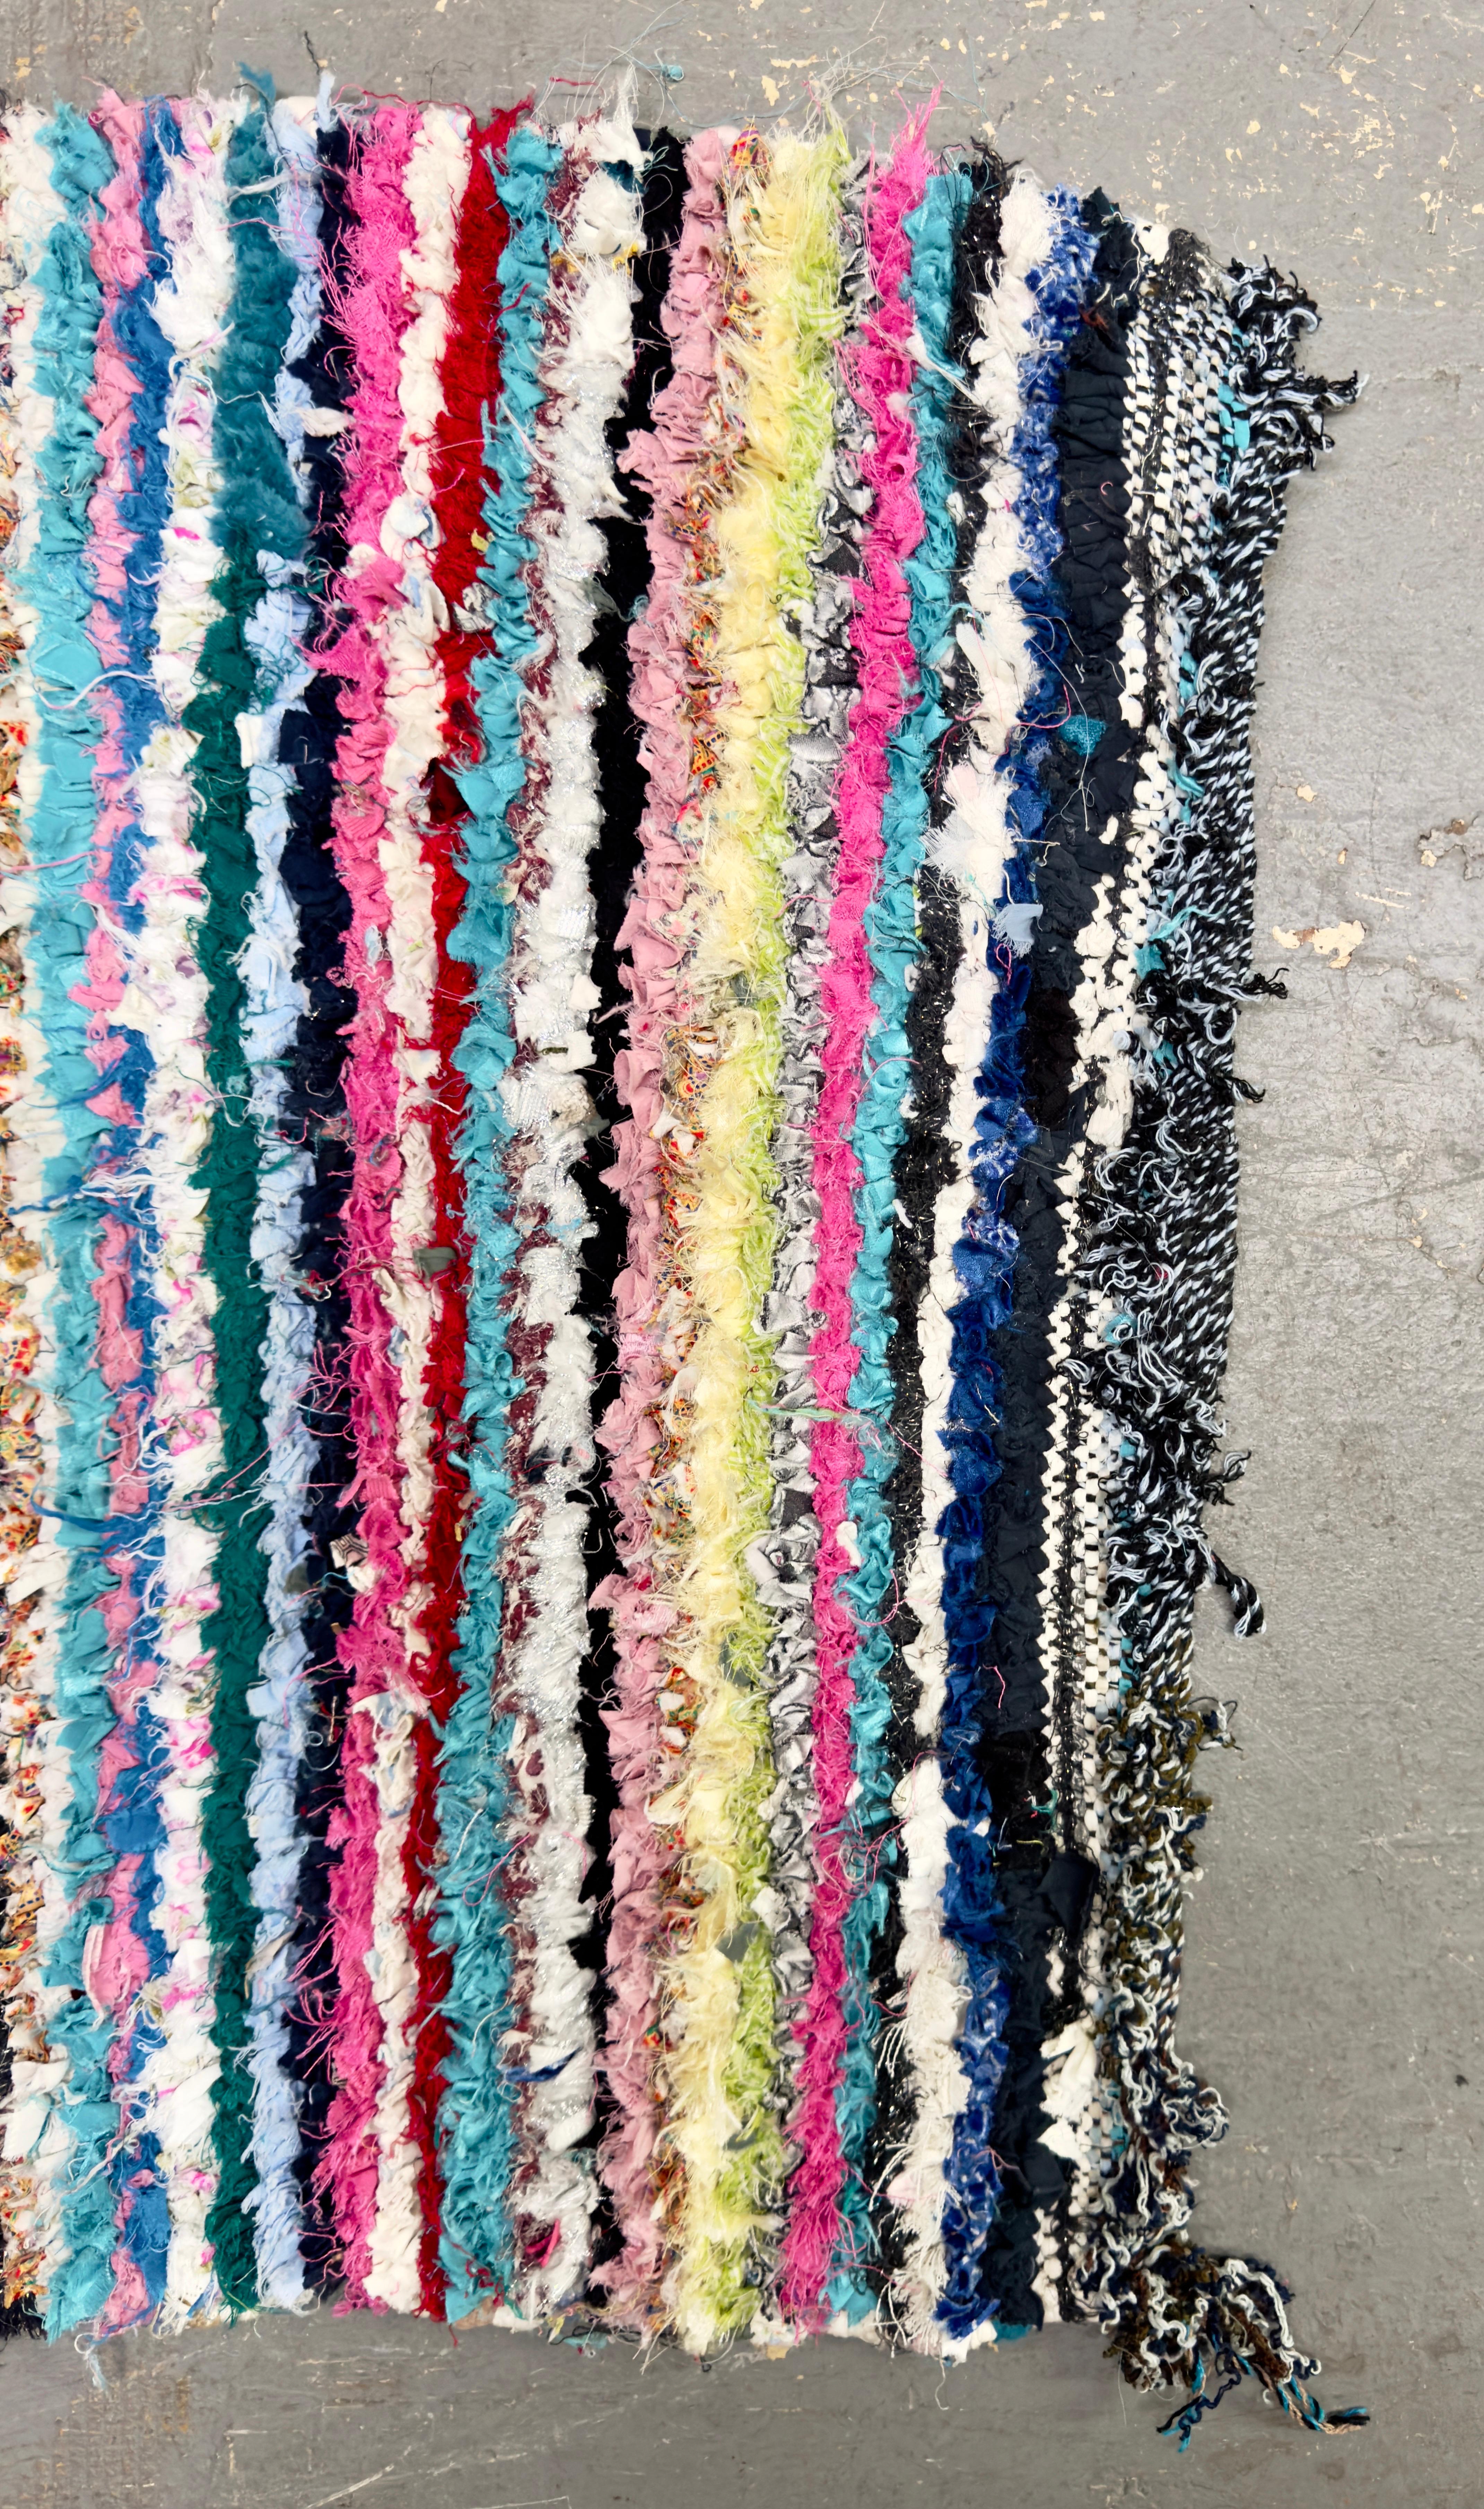 A Boho Chic Moroccan Multi-color Stripe Design Small Rug or Carpet. The  Rug is a unique piece handmade using recycled fabric scraps  transformed into beautiful work of art.  The small Boho Chic area rug is versatile in style can be placed in  any